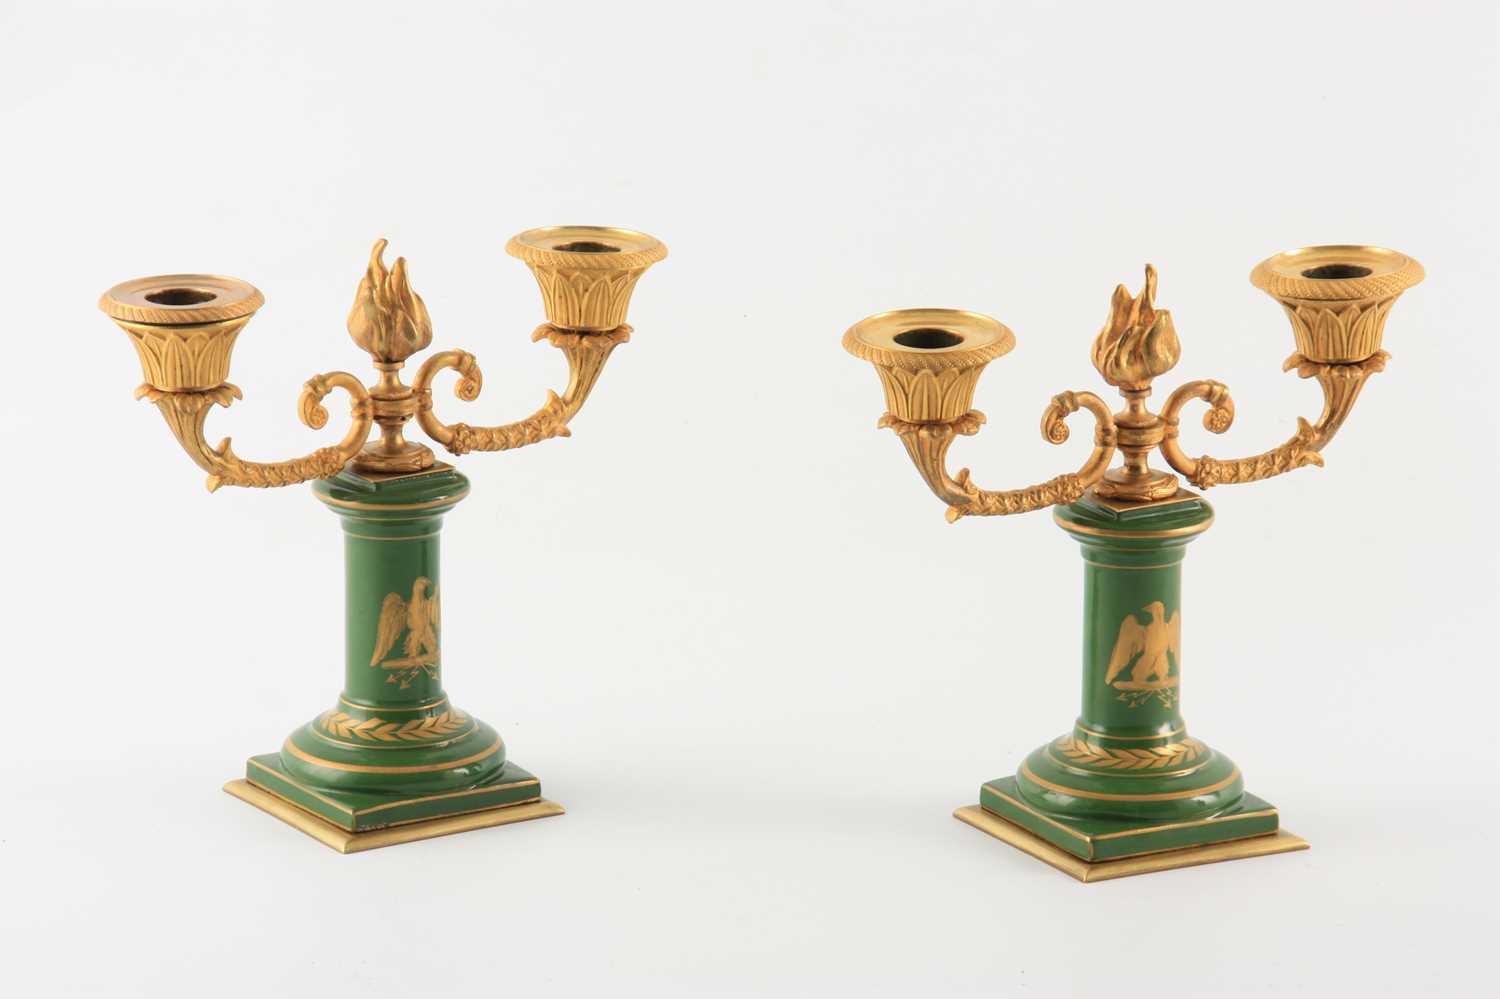 A PAIR OF 19TH CENTURY FRENCH NAPOLEON PORCELAIN AND ORMOLU MOUNTED TWO BRANCH CANDELABRA - Image 4 of 4